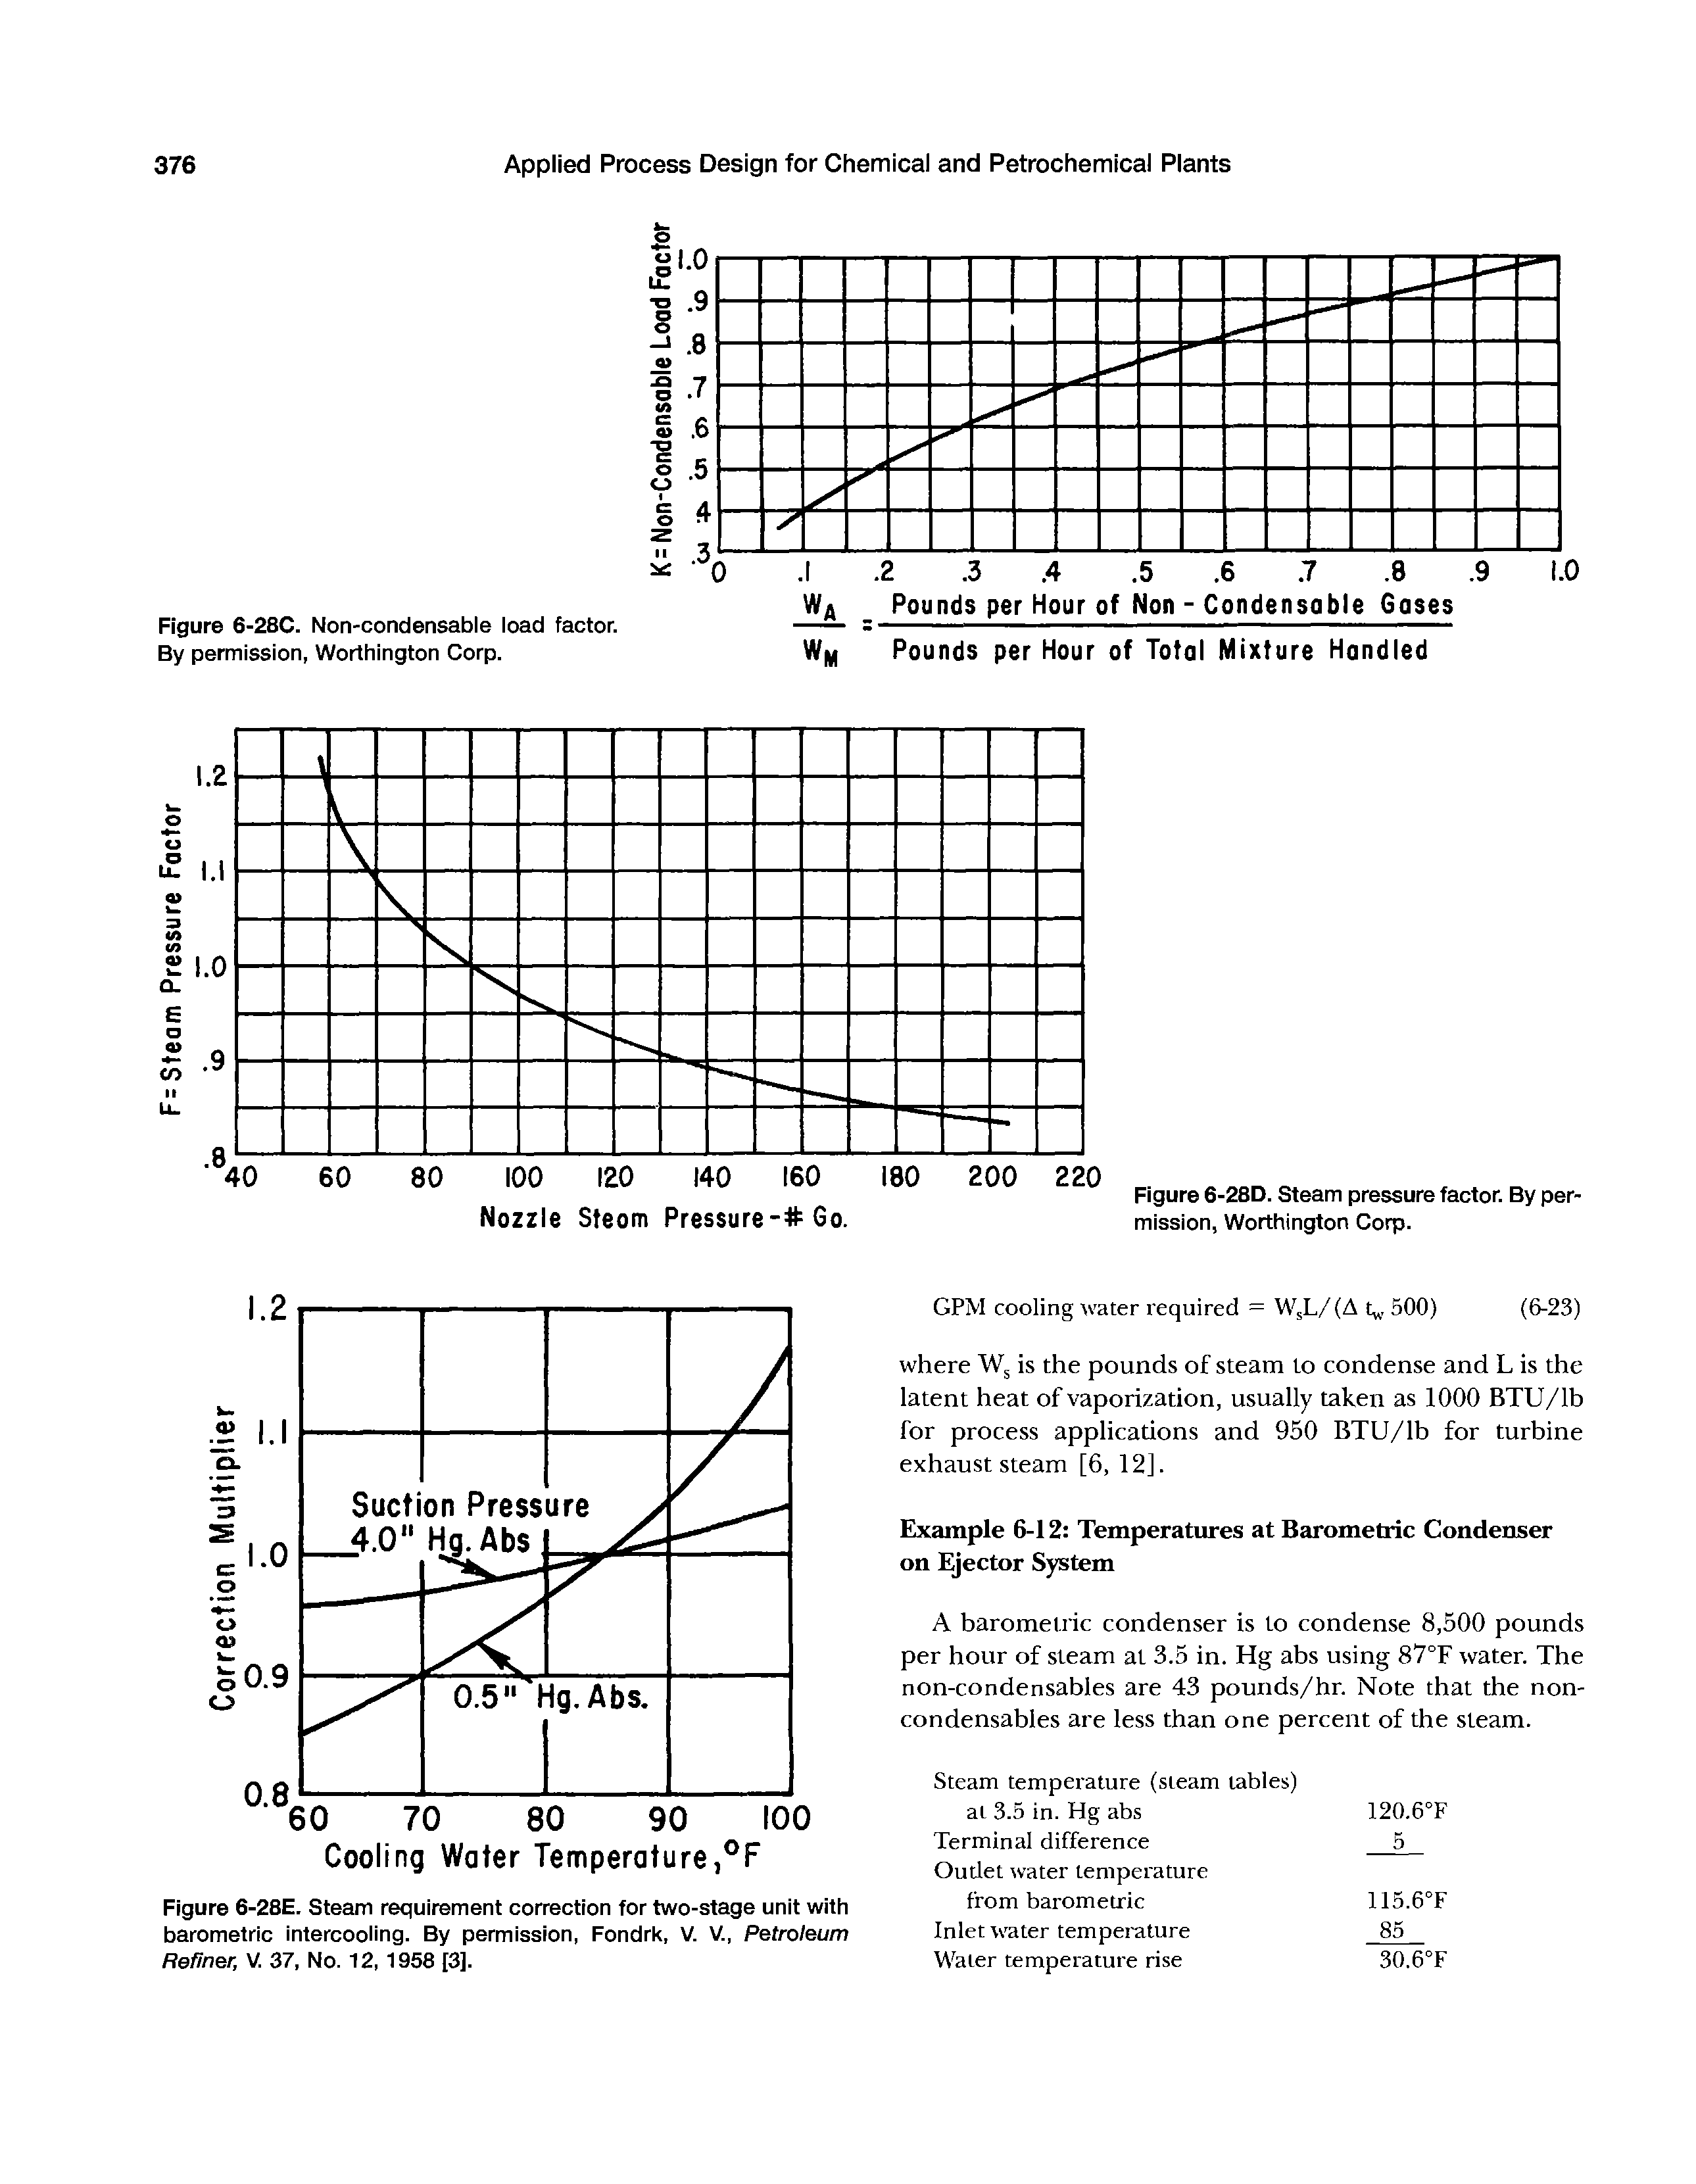 Figure 6-28C. Non-condensable load factor. By permission, Worthington Corp.